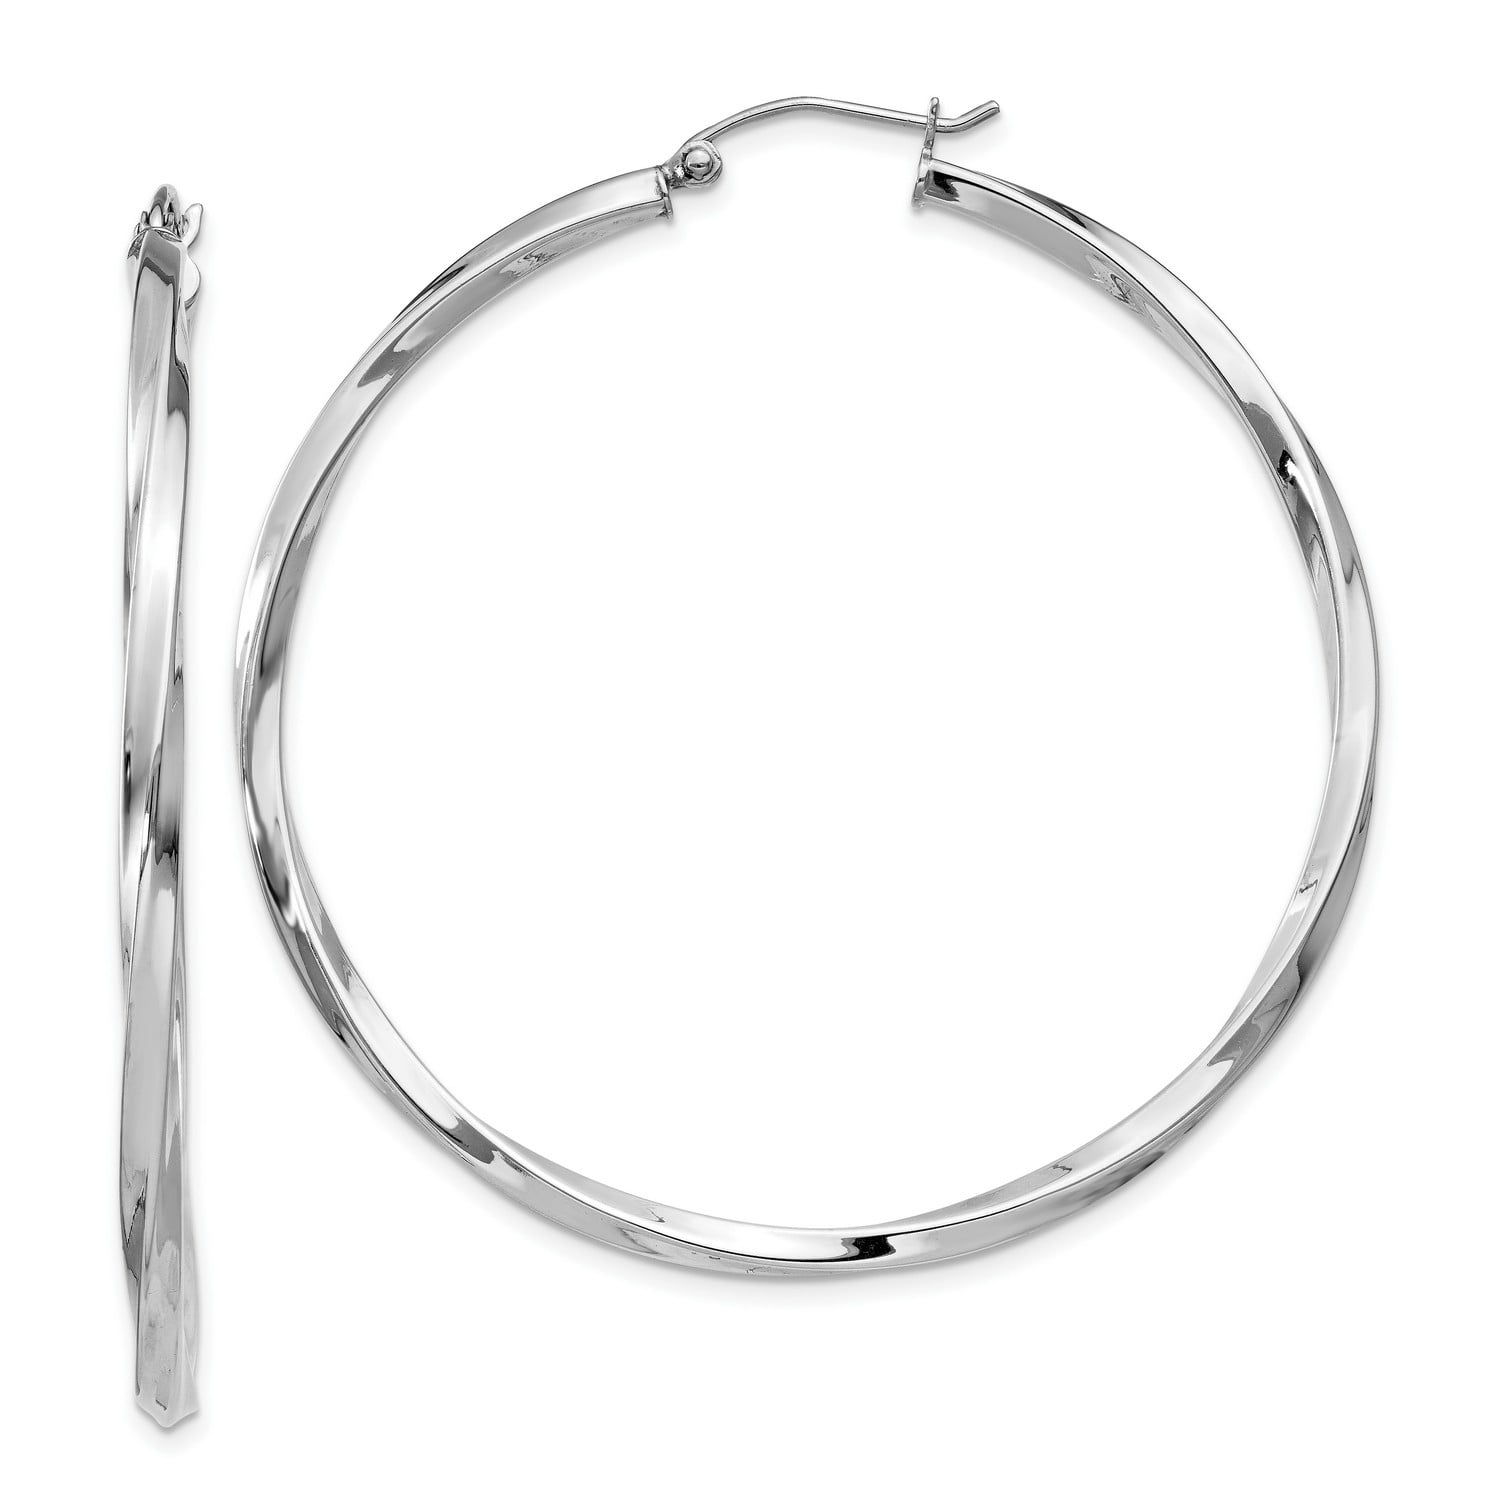 925 Sterling Silver Hollow Polished Rhodium Plated Textured Hinged Hoop Earrings Measures 53x50mm Wide 4mm Thick Jewelry Gifts for Women